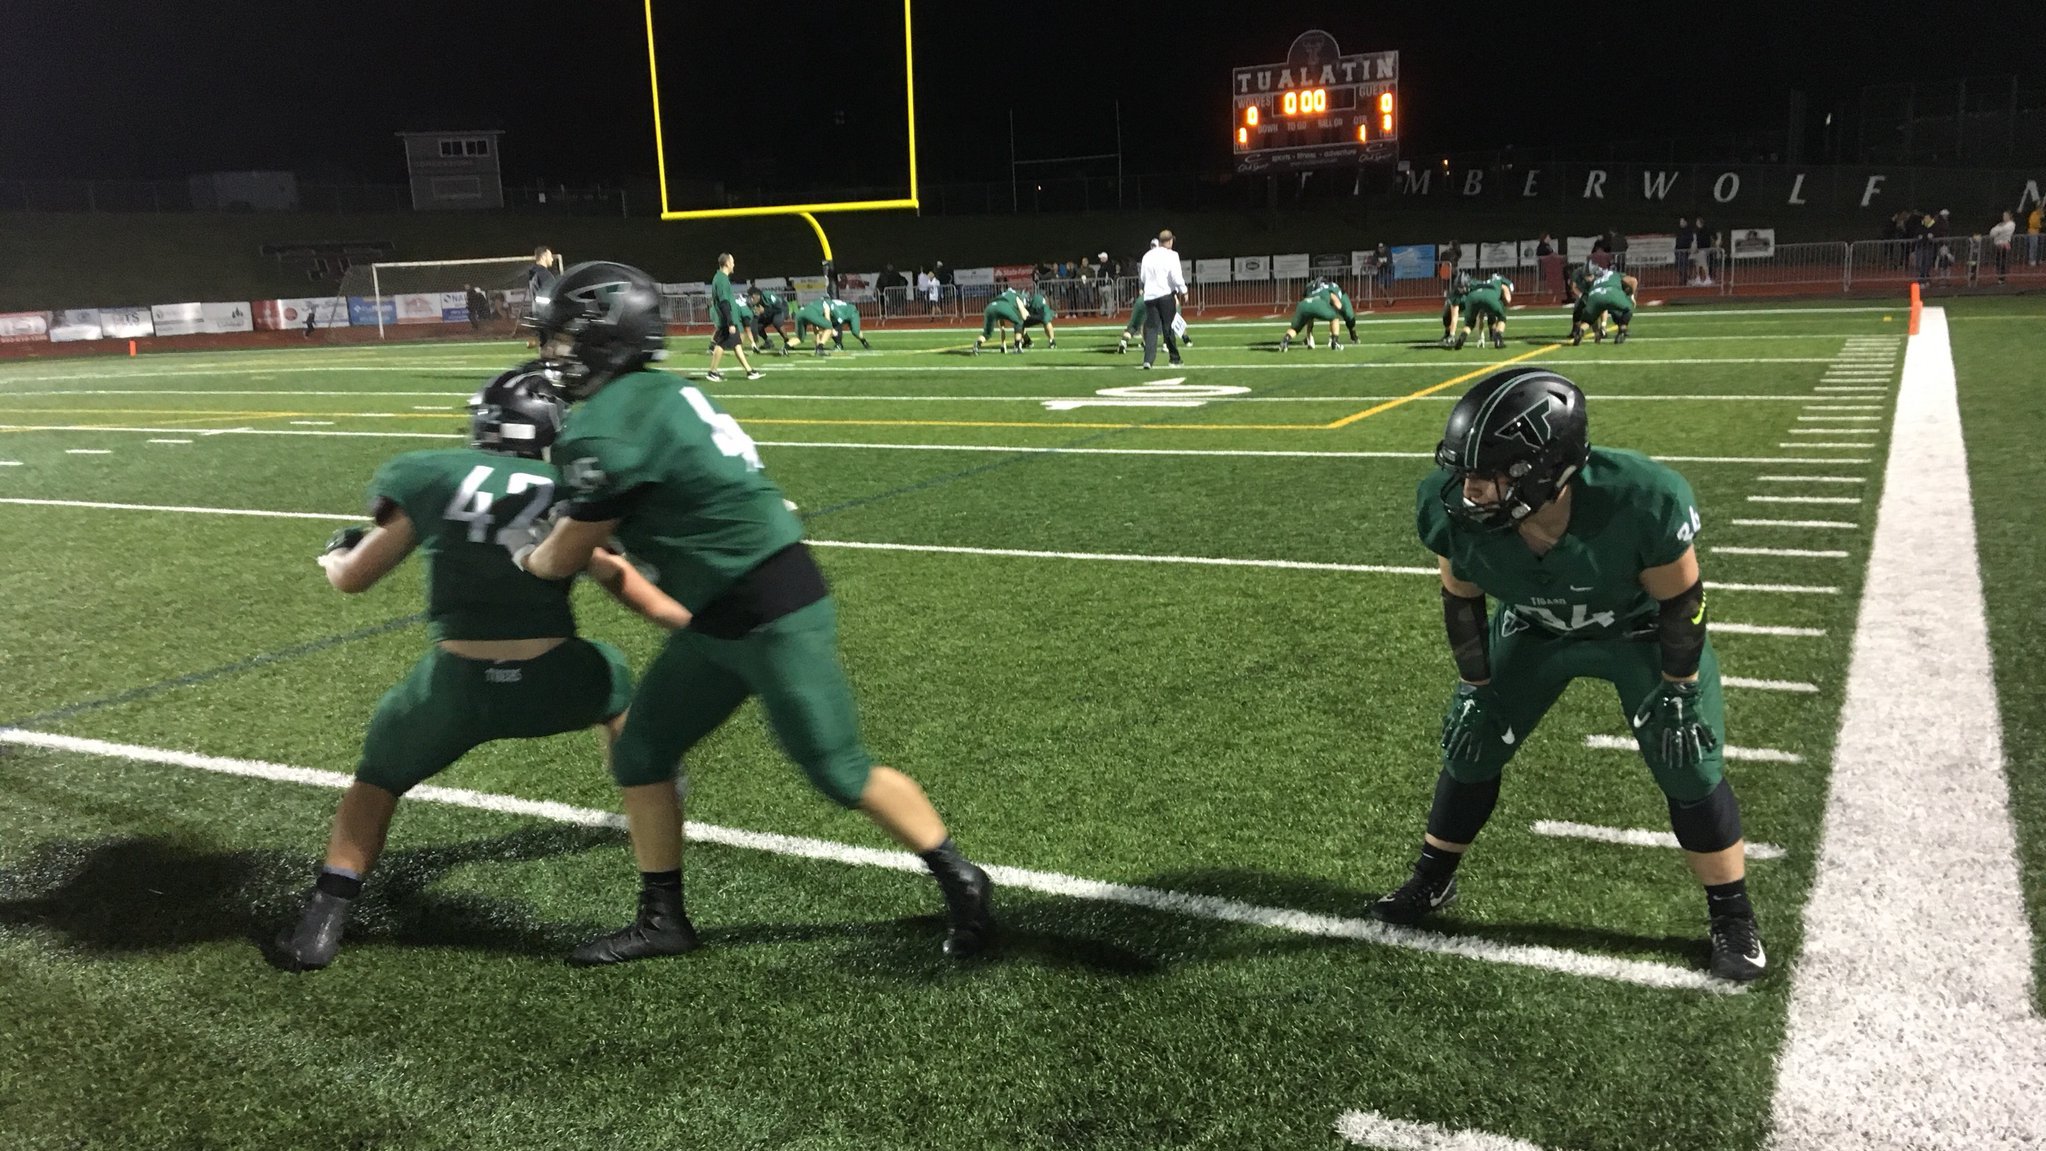 kgw.com | Power outage leads to relocation of Tigard-Tualatin football game2046 x 1151